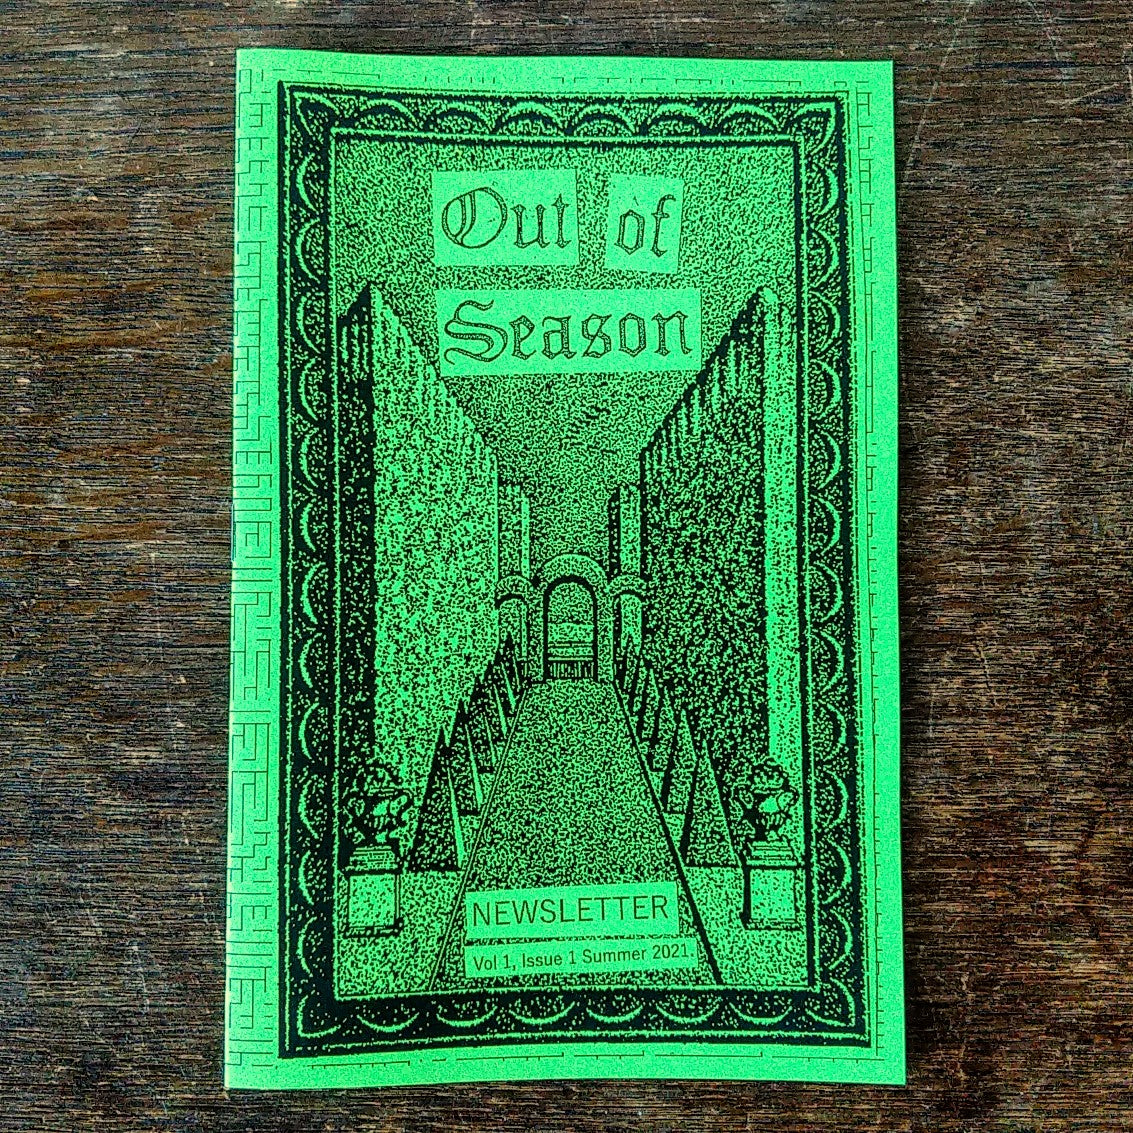 [SOLD OUT] OUT OF SEASON Newsletter Vol 1 Issue 1 (Summer 2021) *FREE W/ PURCHASE*